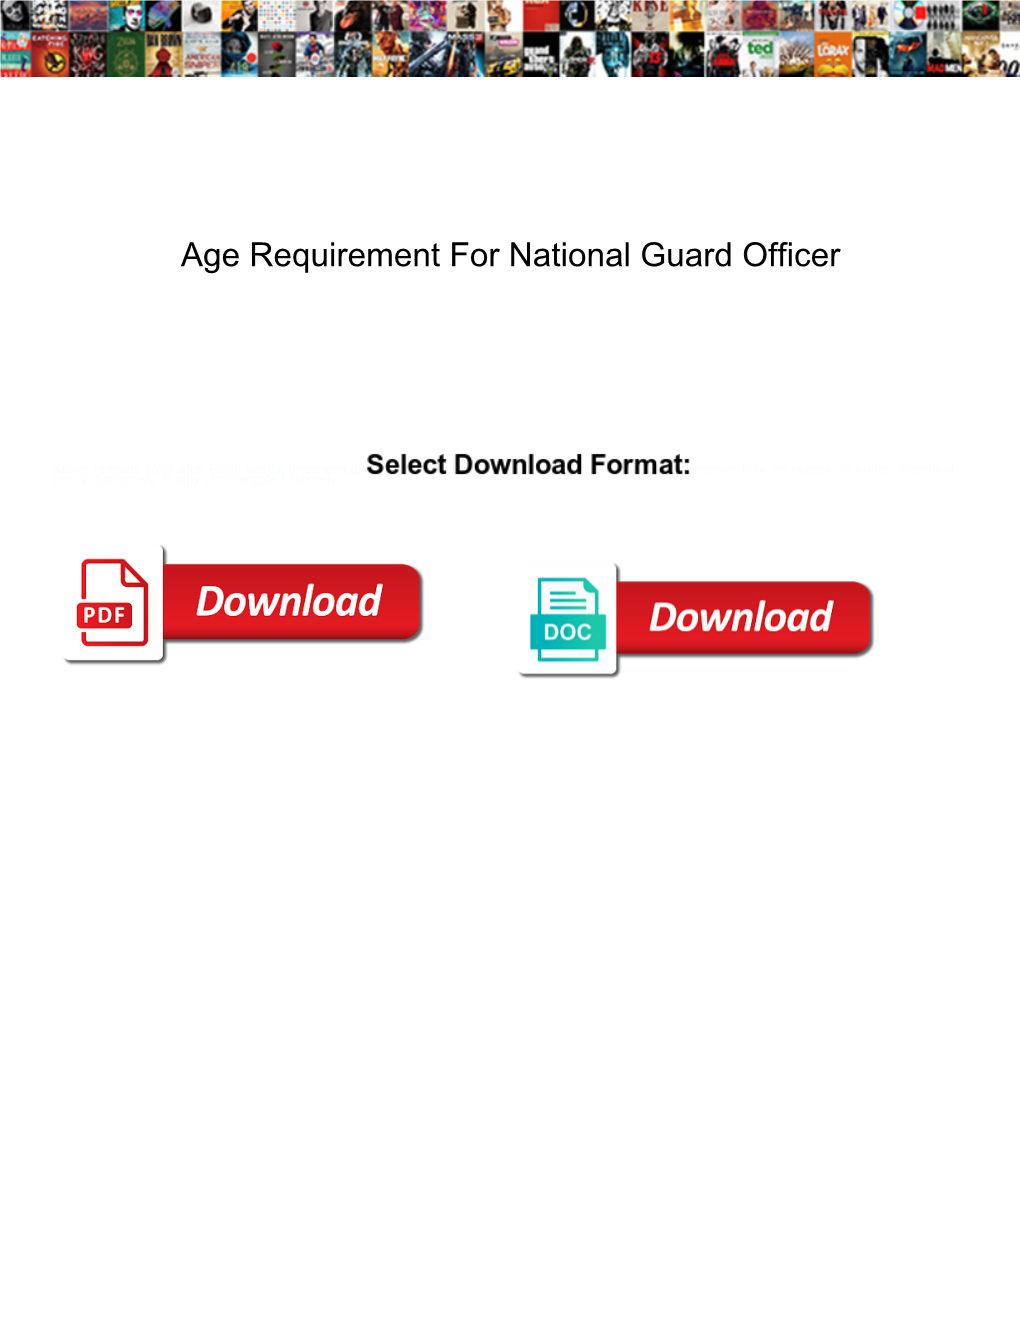 Age Requirement for National Guard Officer